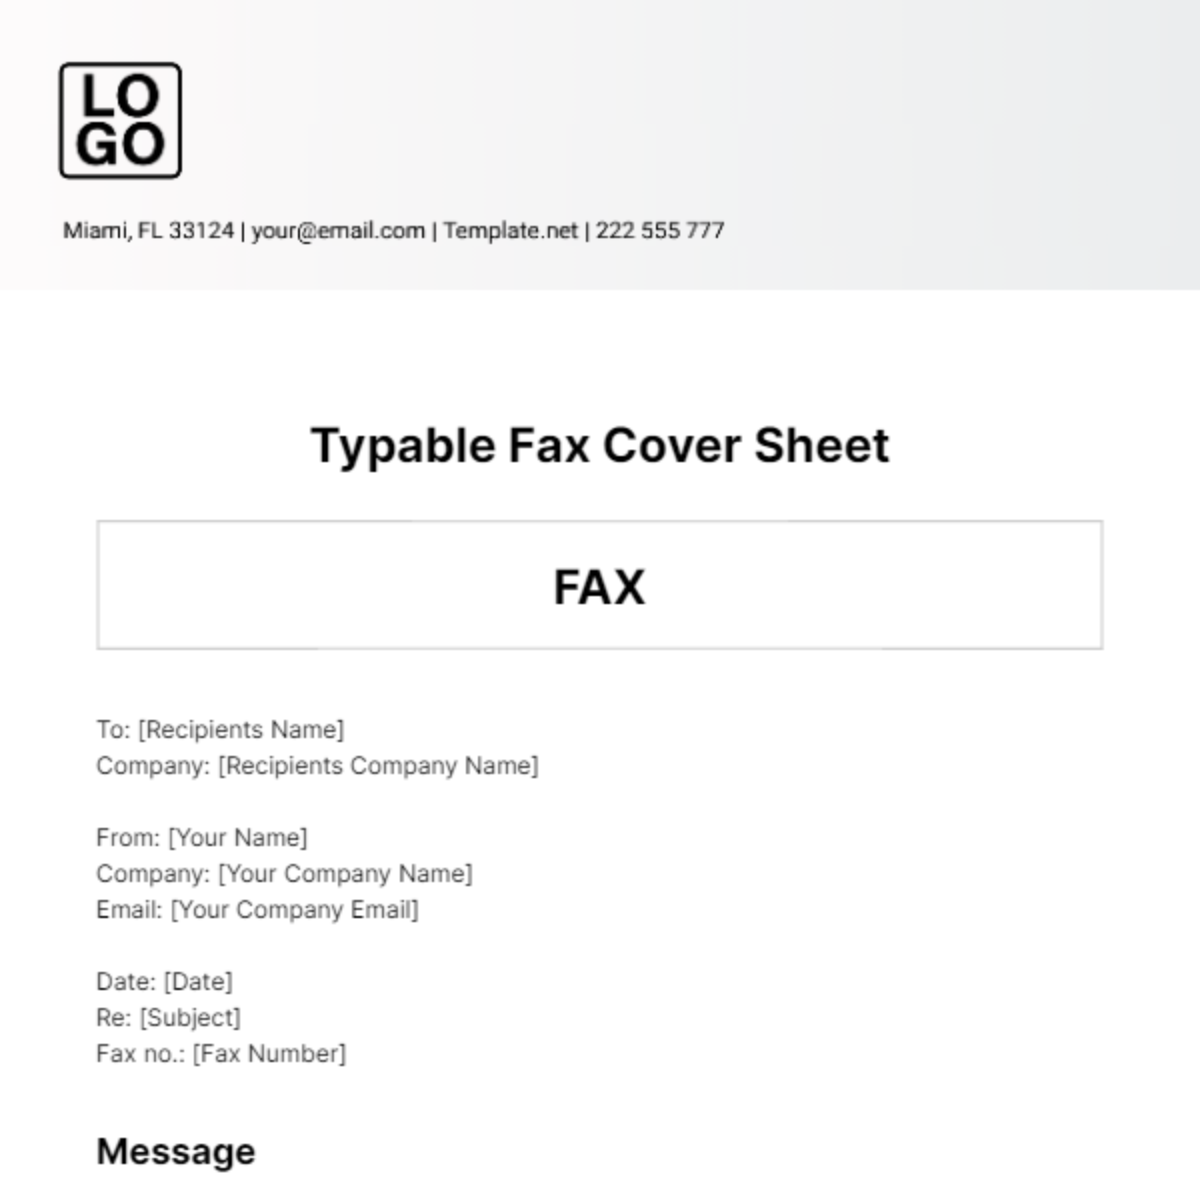 Typable Fax Cover Sheet